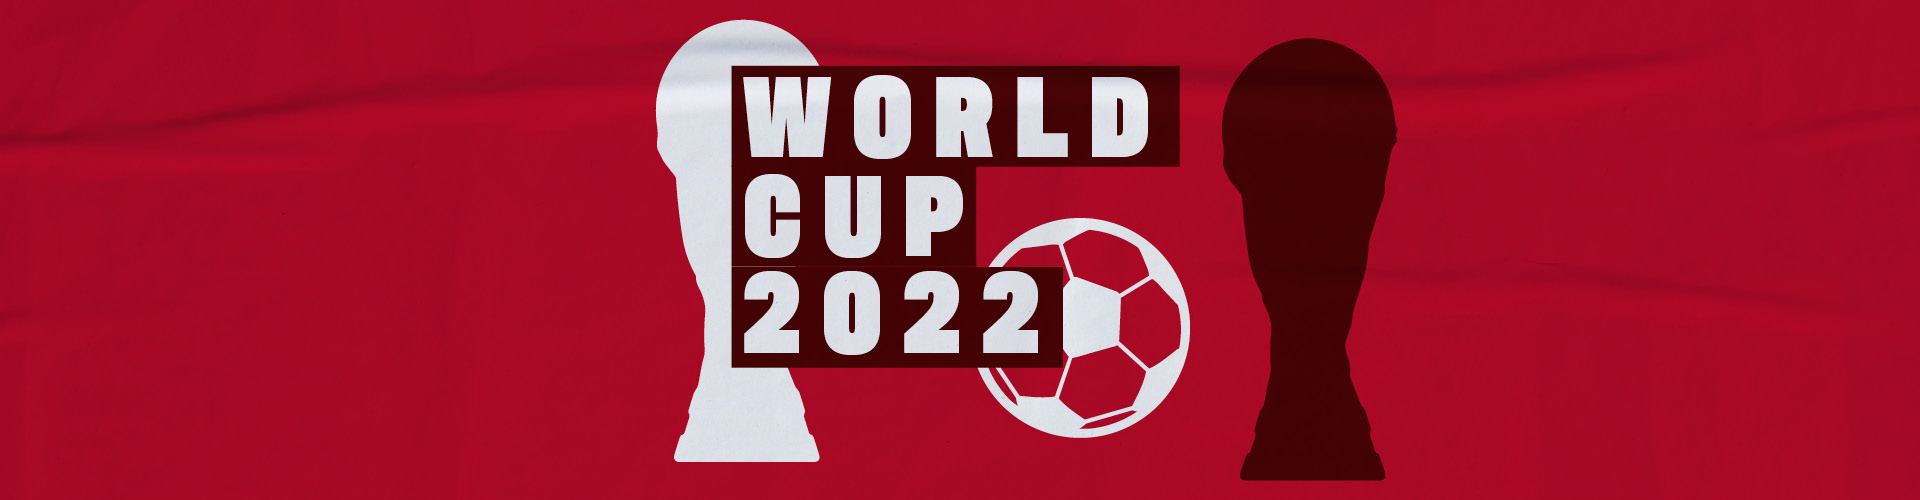 World Cup 2022, with World Cup Trophy and Football